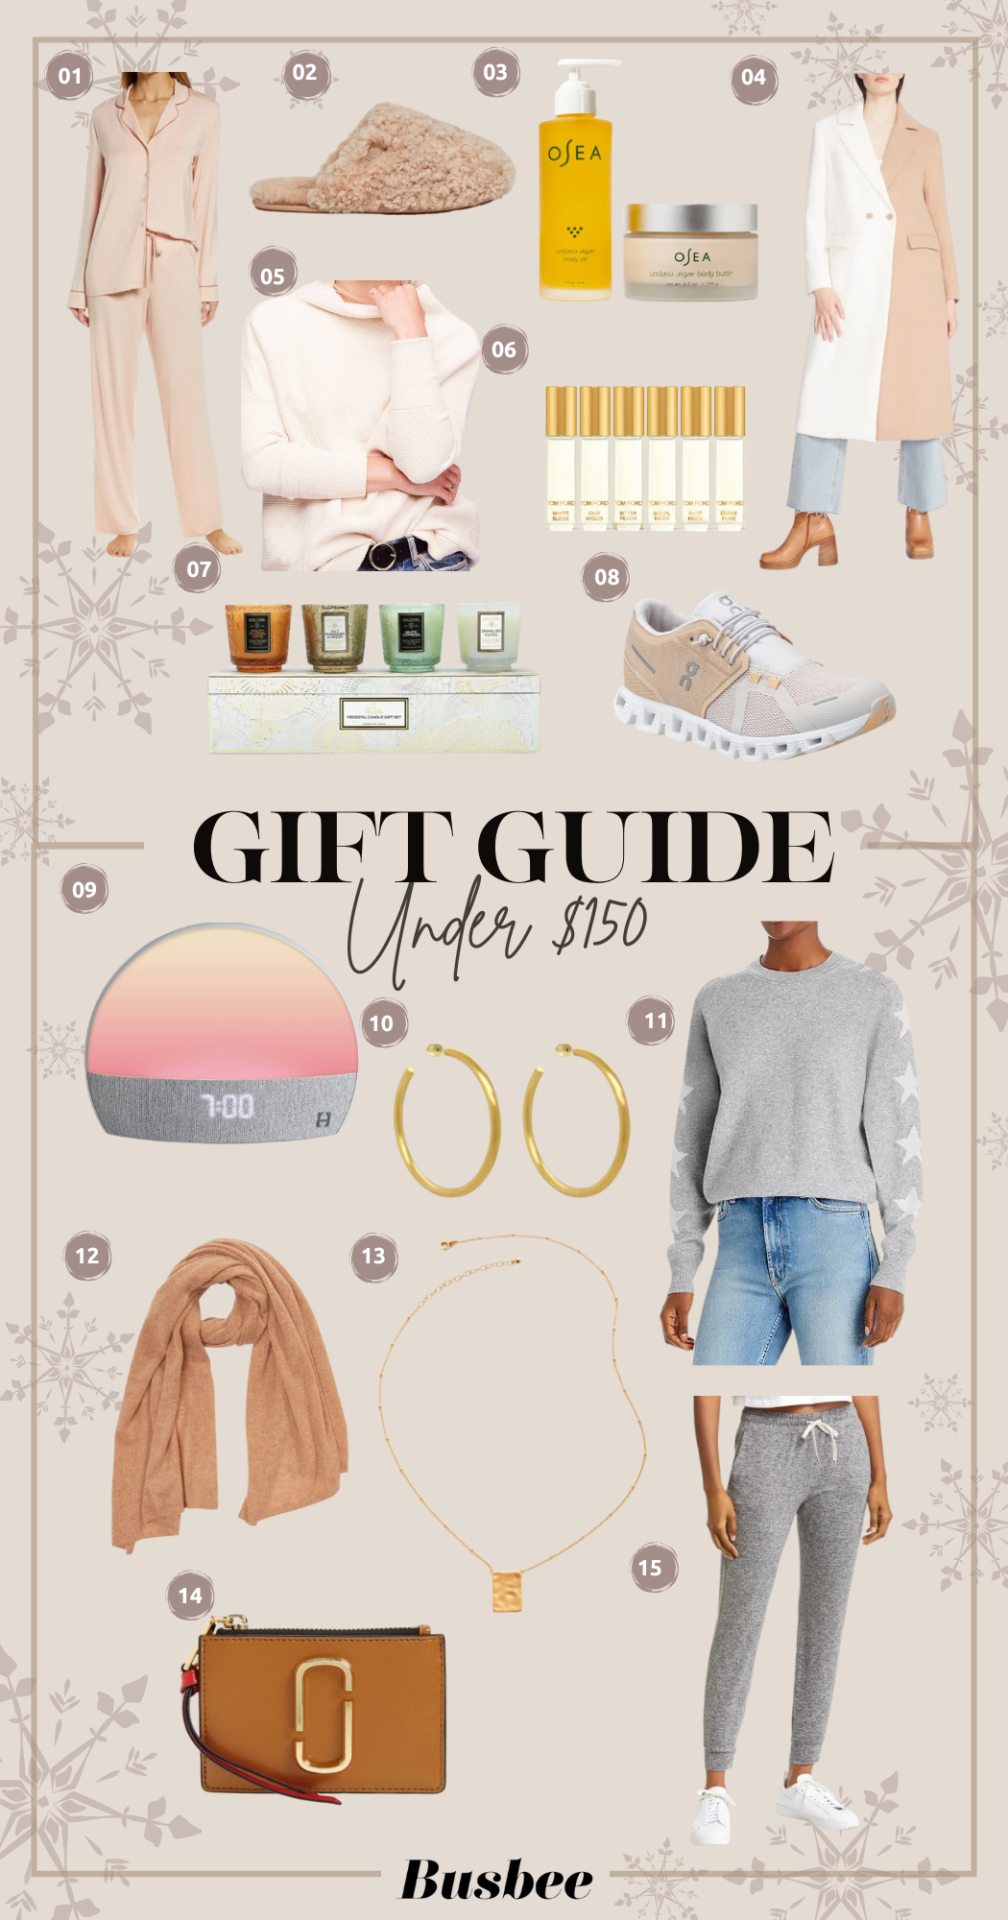 gifts under $150, unique gifts, affordable gifts, affordable unique gifts, gift guide under $150, under $150 gifts, gift ideas under $150, affordable gifts for her, erin Busbee, Busbee style, fashion blogger over 40, telluride, CO